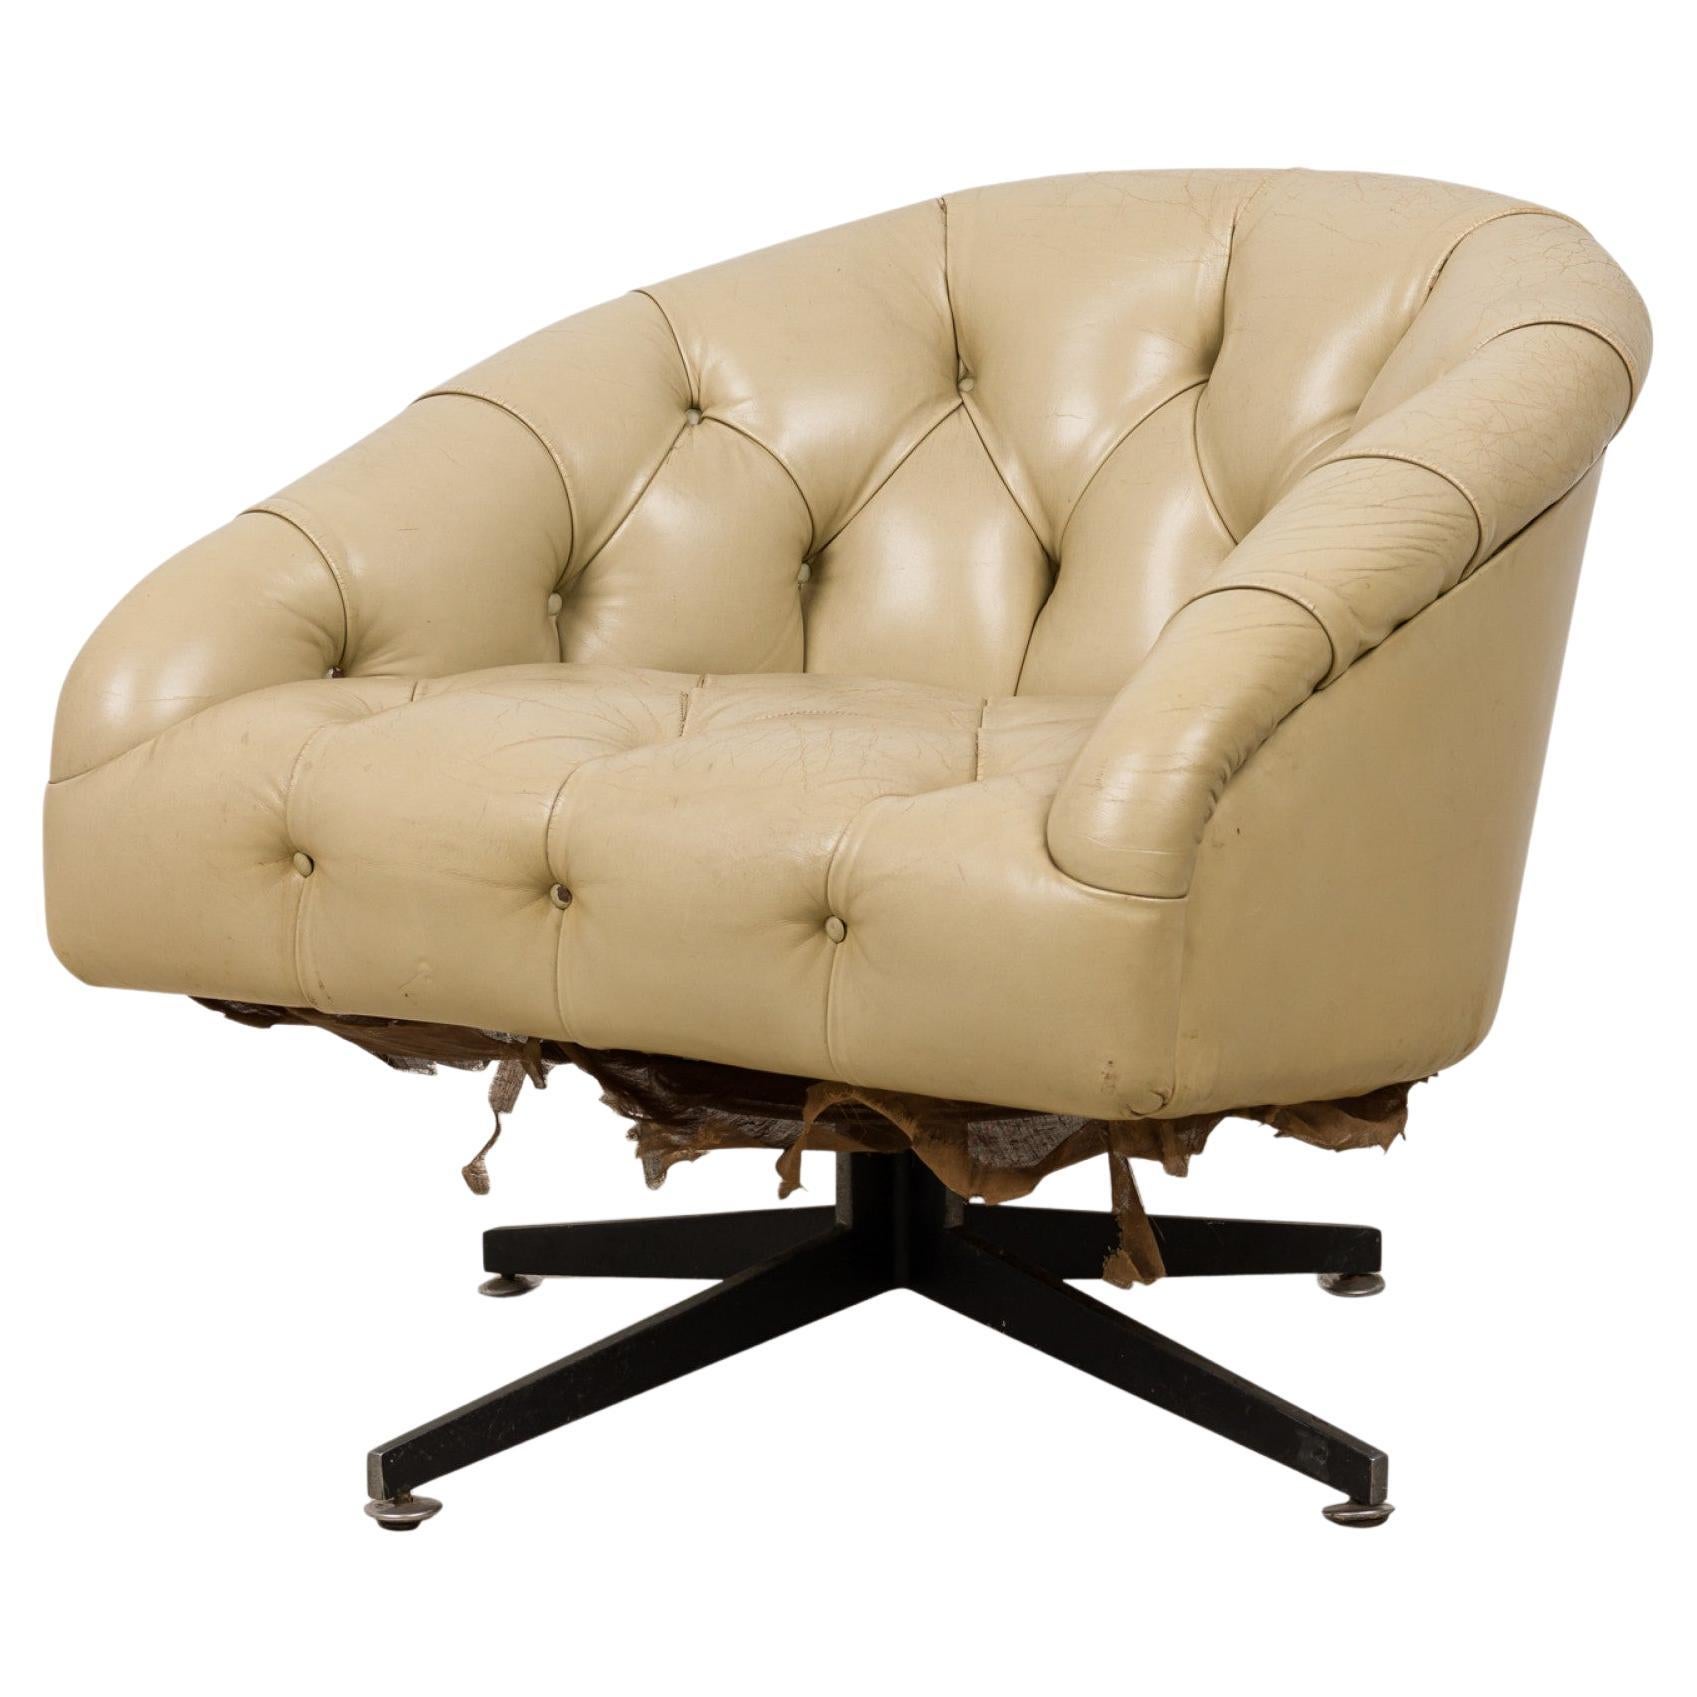 Ward Bennett Chrome and Beige Tufted Leather Swivel Tub Lounge / Armchair For Sale